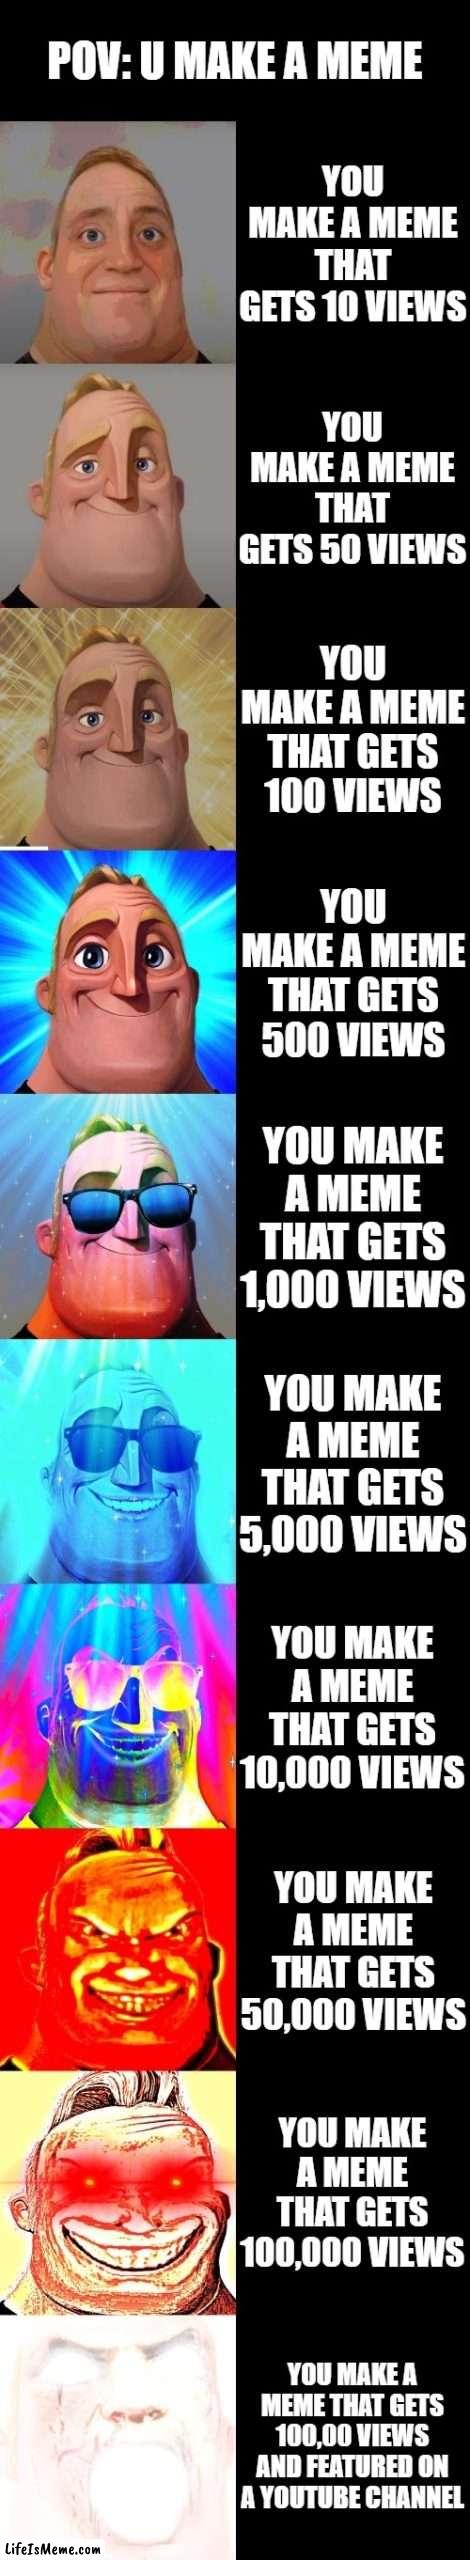 POV: Views | POV: U MAKE A MEME; YOU MAKE A MEME THAT GETS 10 VIEWS; YOU MAKE A MEME THAT GETS 50 VIEWS; YOU MAKE A MEME THAT GETS 100 VIEWS; YOU MAKE A MEME THAT GETS 500 VIEWS; YOU MAKE A MEME THAT GETS 1,000 VIEWS; YOU MAKE A MEME THAT GETS 5,000 VIEWS; YOU MAKE A MEME THAT GETS 10,000 VIEWS; YOU MAKE A MEME THAT GETS 50,000 VIEWS; YOU MAKE A MEME THAT GETS 100,000 VIEWS; YOU MAKE A MEME THAT GETS 100,00 VIEWS AND FEATURED ON A YOUTUBE CHANNEL | image tagged in mr incredible becoming canny,imgflip,funny,memes,views,laugh | made w/ Lifeismeme meme maker